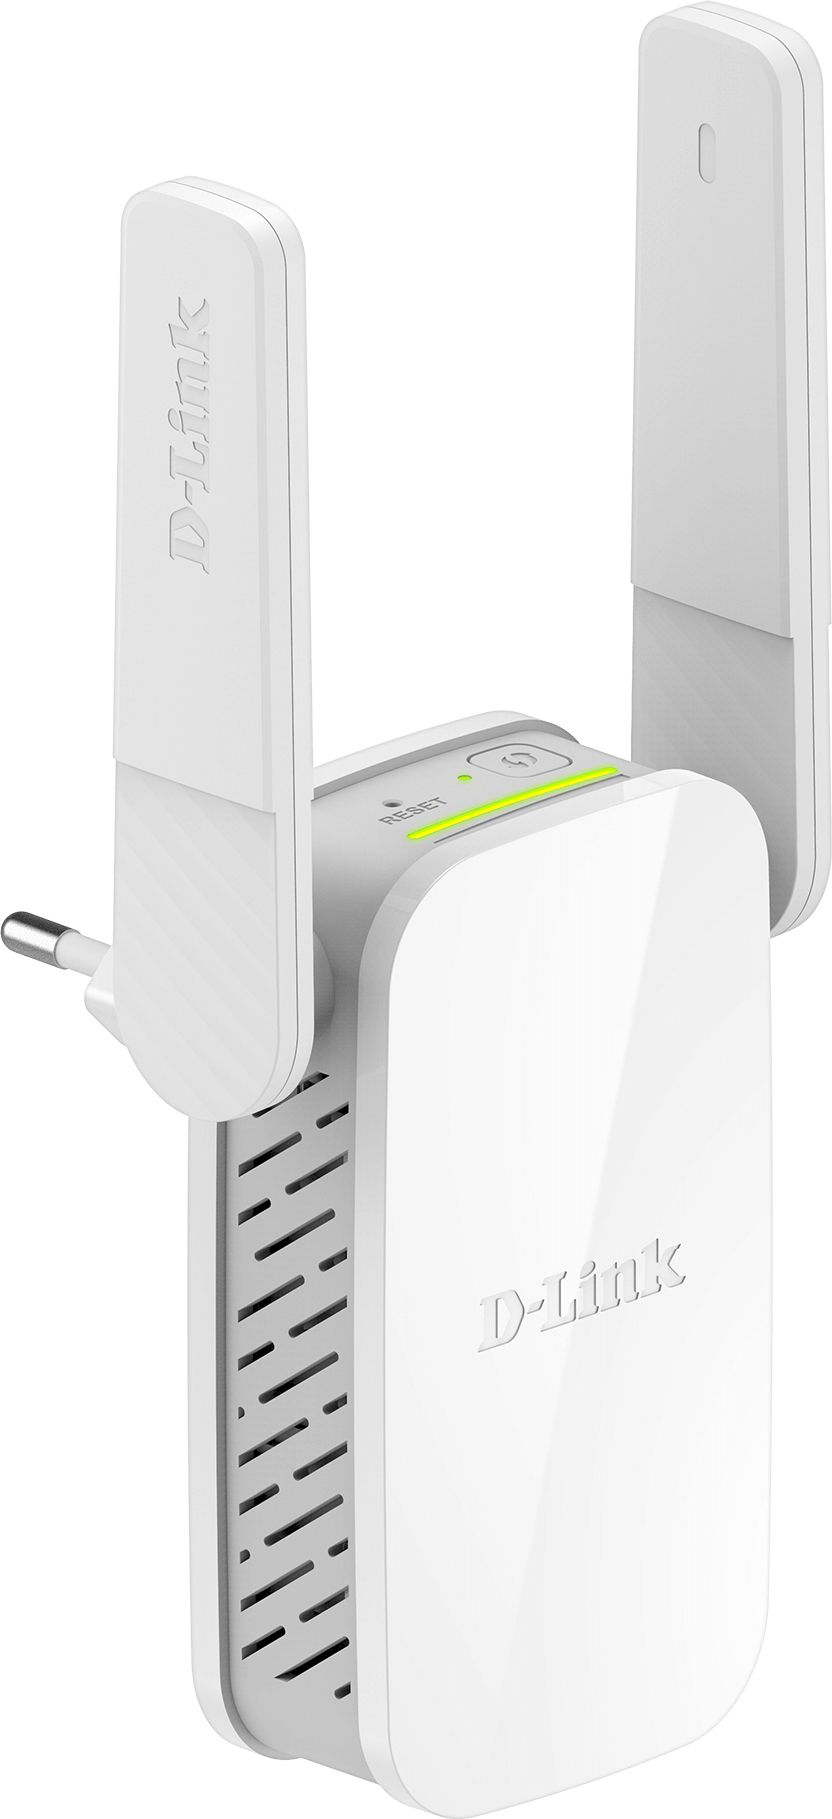 D-link Wireless AC1200 Dual Band Range Extender DAP-1610, with FE port; Compact Wall Plug design; External antenna design; 2x2 11ac Technology, Up to 1200 Mbps data rate; Complying with the IEEE 802.11 ac draft, a, n, g, and b; WPS (WiFi Protected Setup); WPA2/WPA wireless encryption; D-Link_4